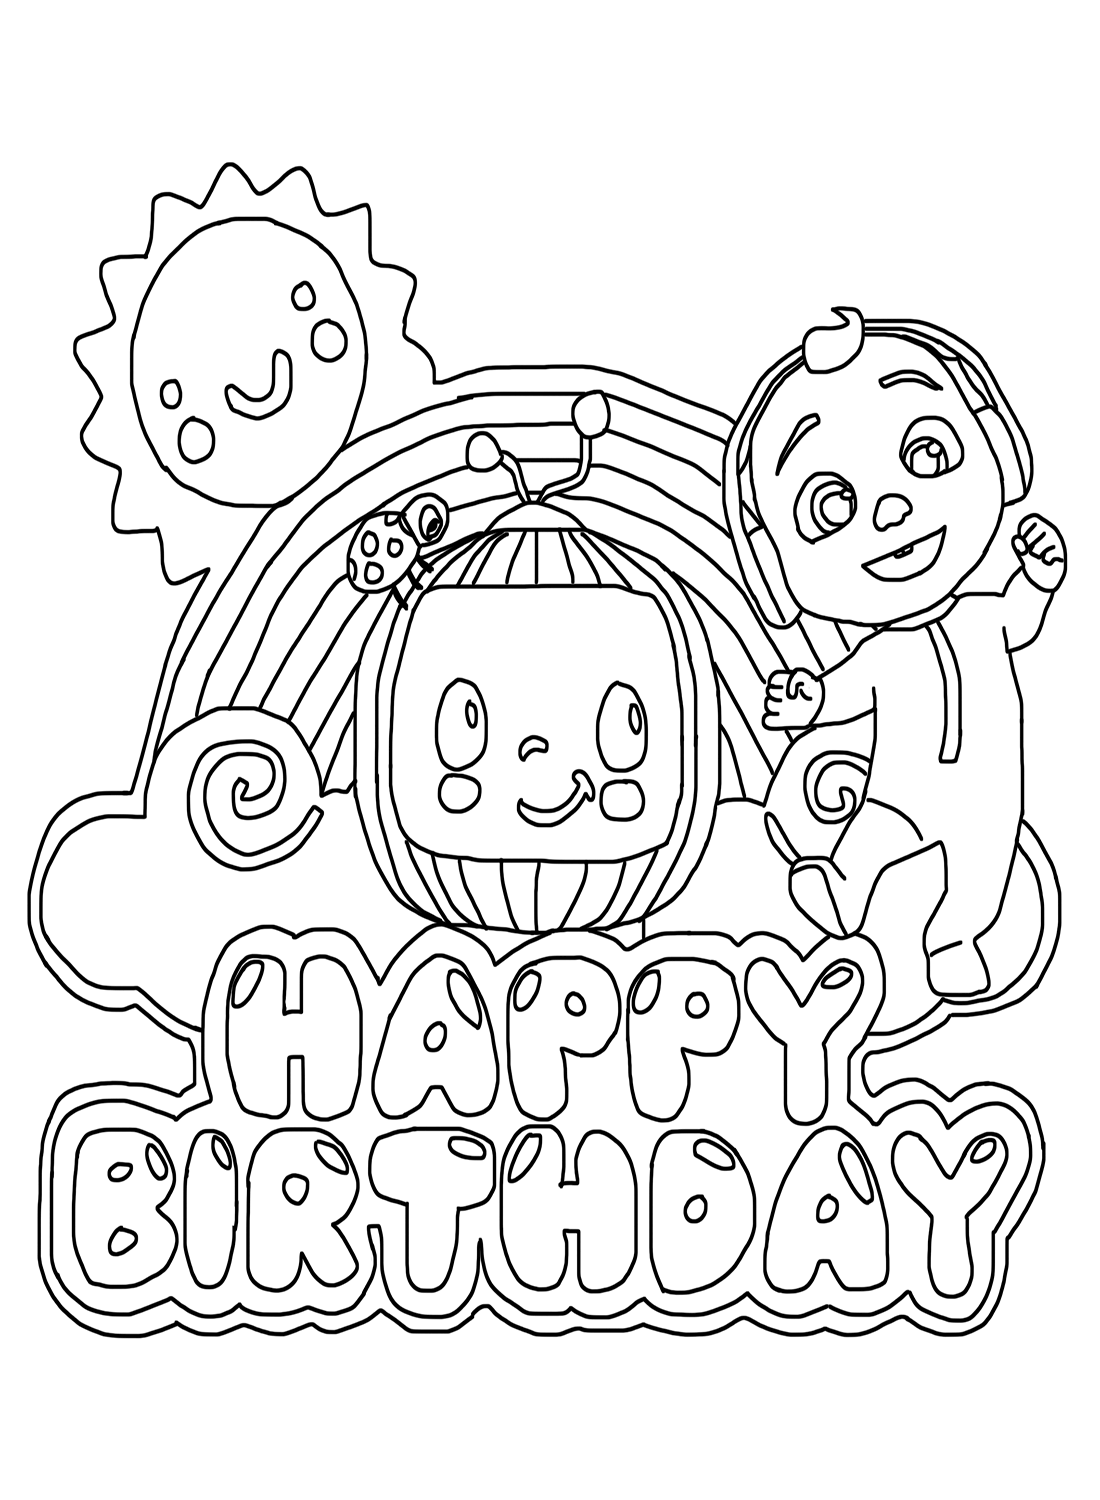 Happy Birthday Cocomelon Coloring Pages from Cocomelon